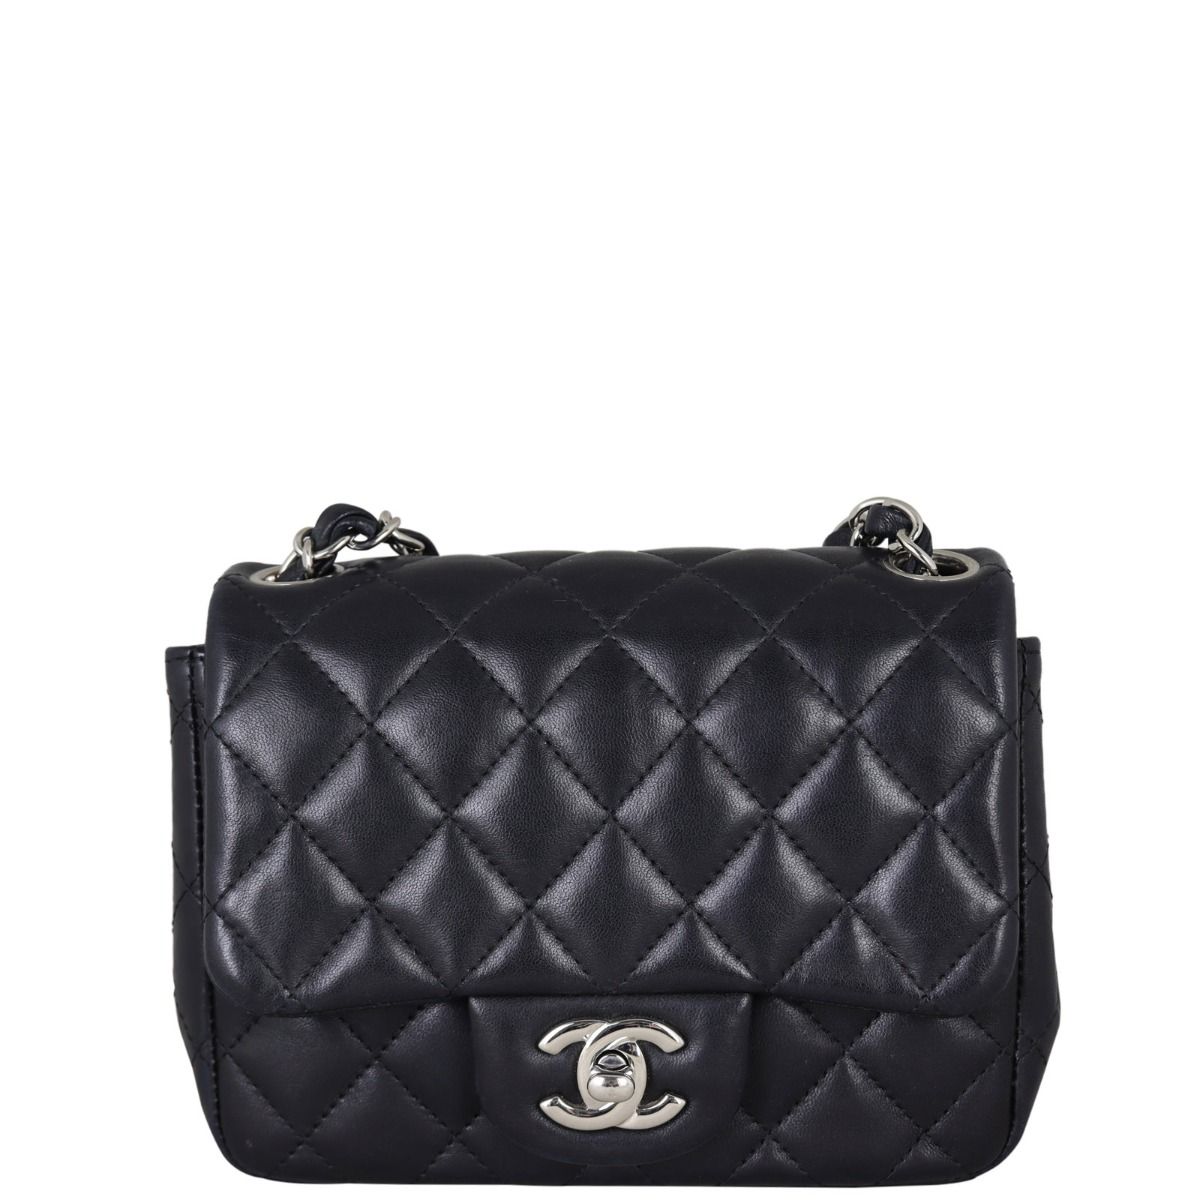 Chanel Black Quilted Lambskin Mini Vintage Classic Flap Bag Chanel